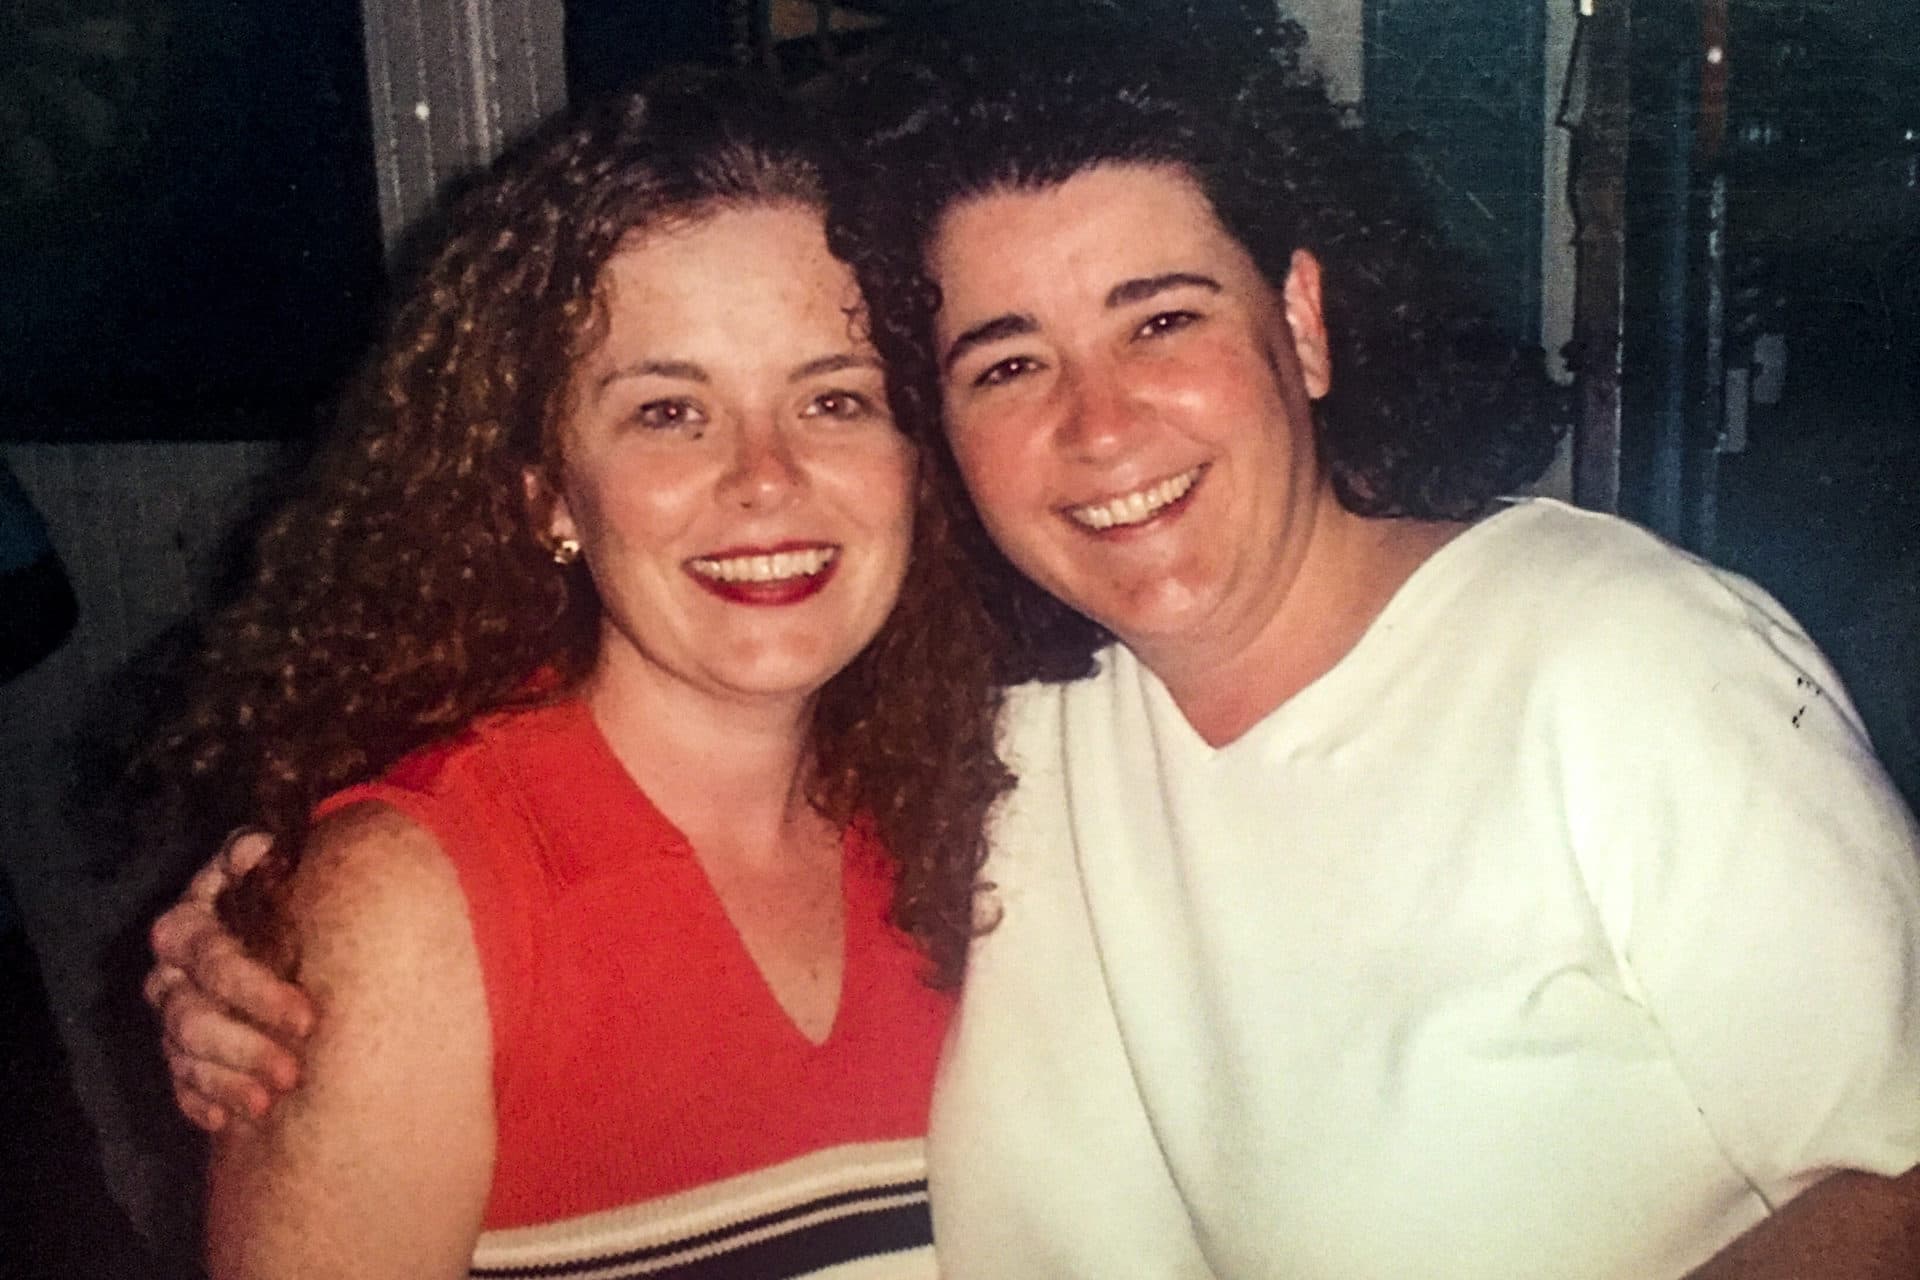 Mary Fairbairn, right, and her sister, Ann Donahue, at Mary’s 40th birthday party. (Courtesy Ann Donahue)